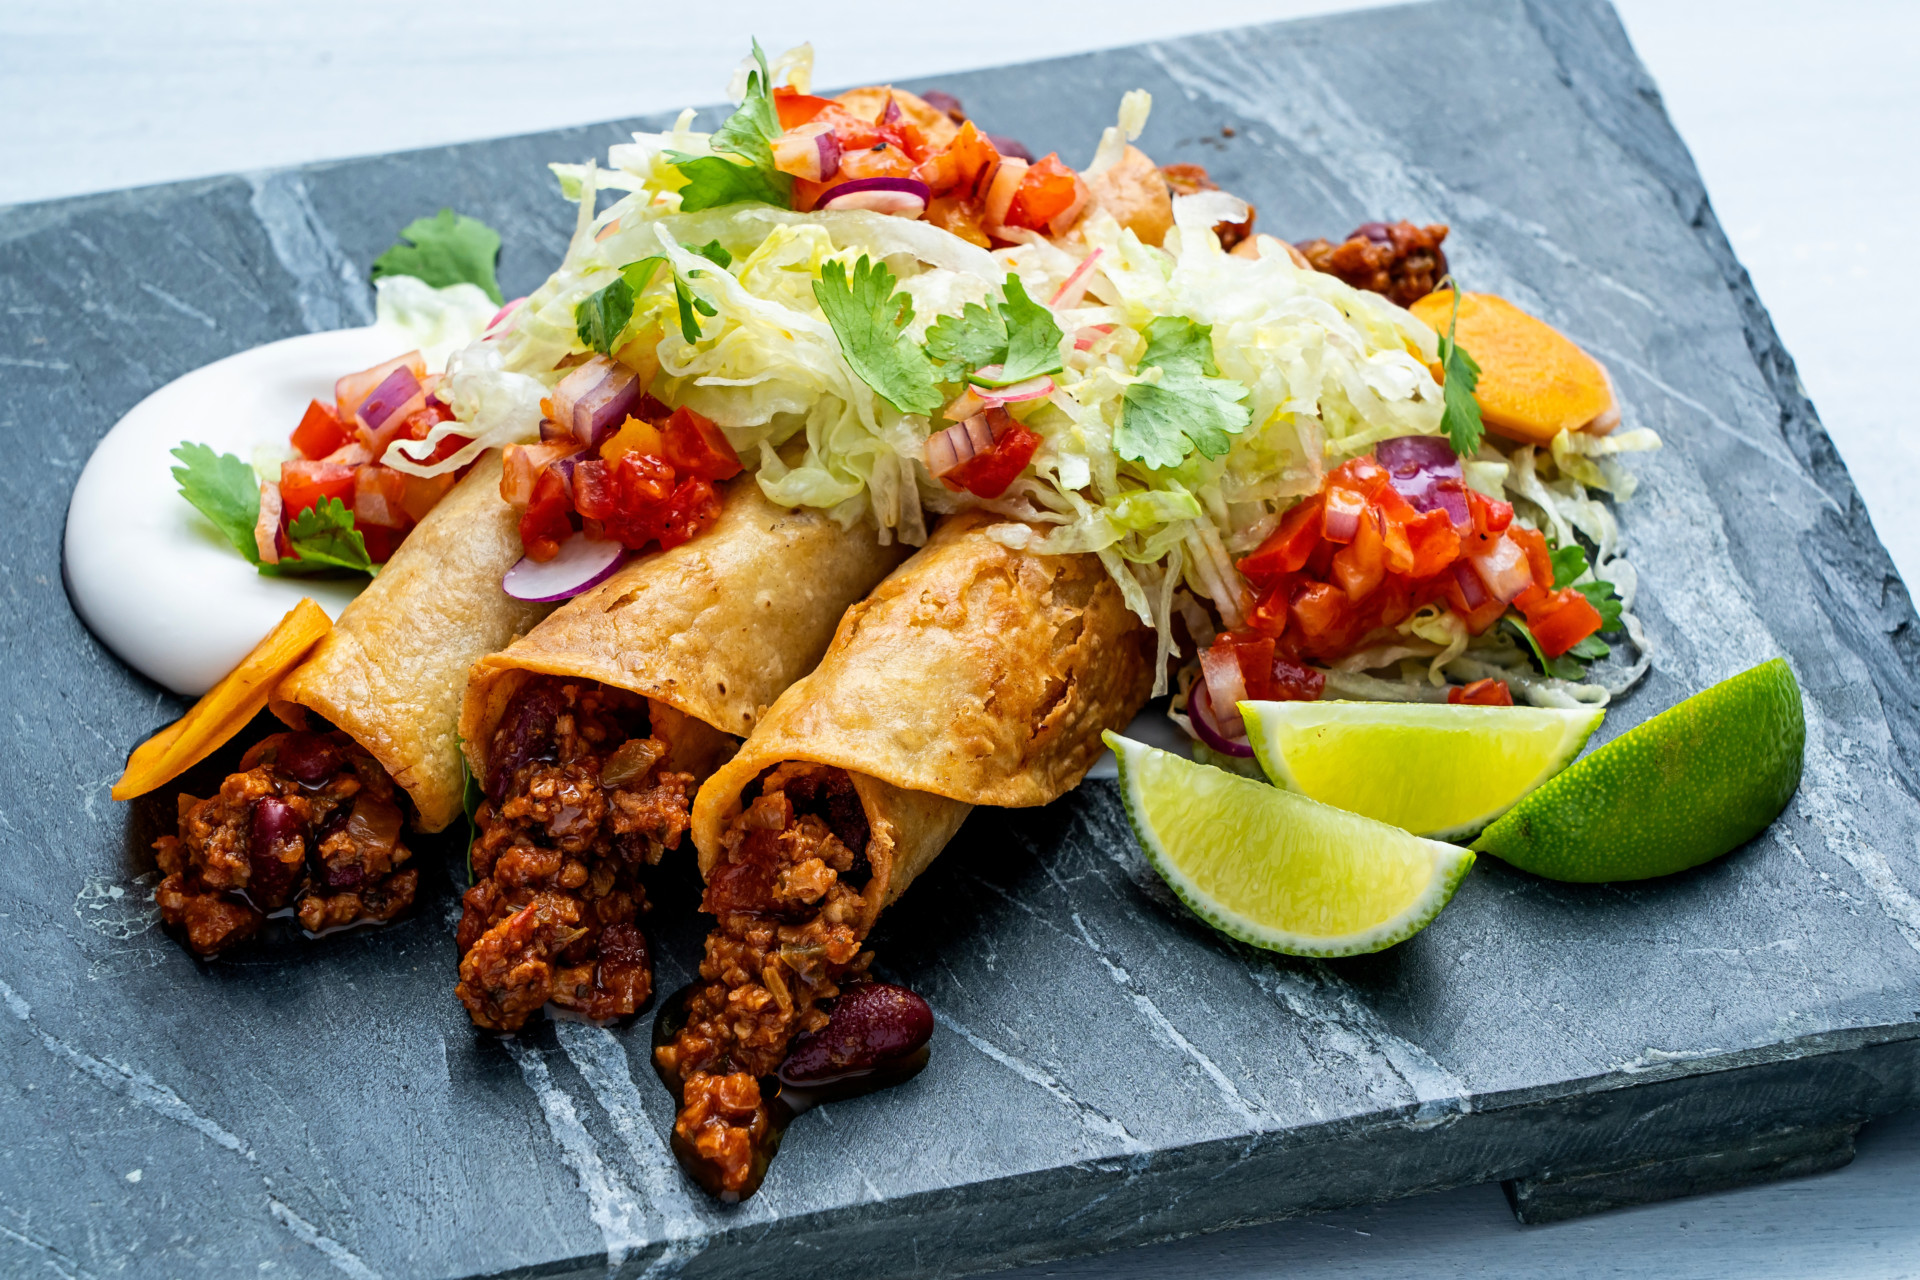 Vegan Chili Taquitos topped with greens, tomatoes, sour cream and limes